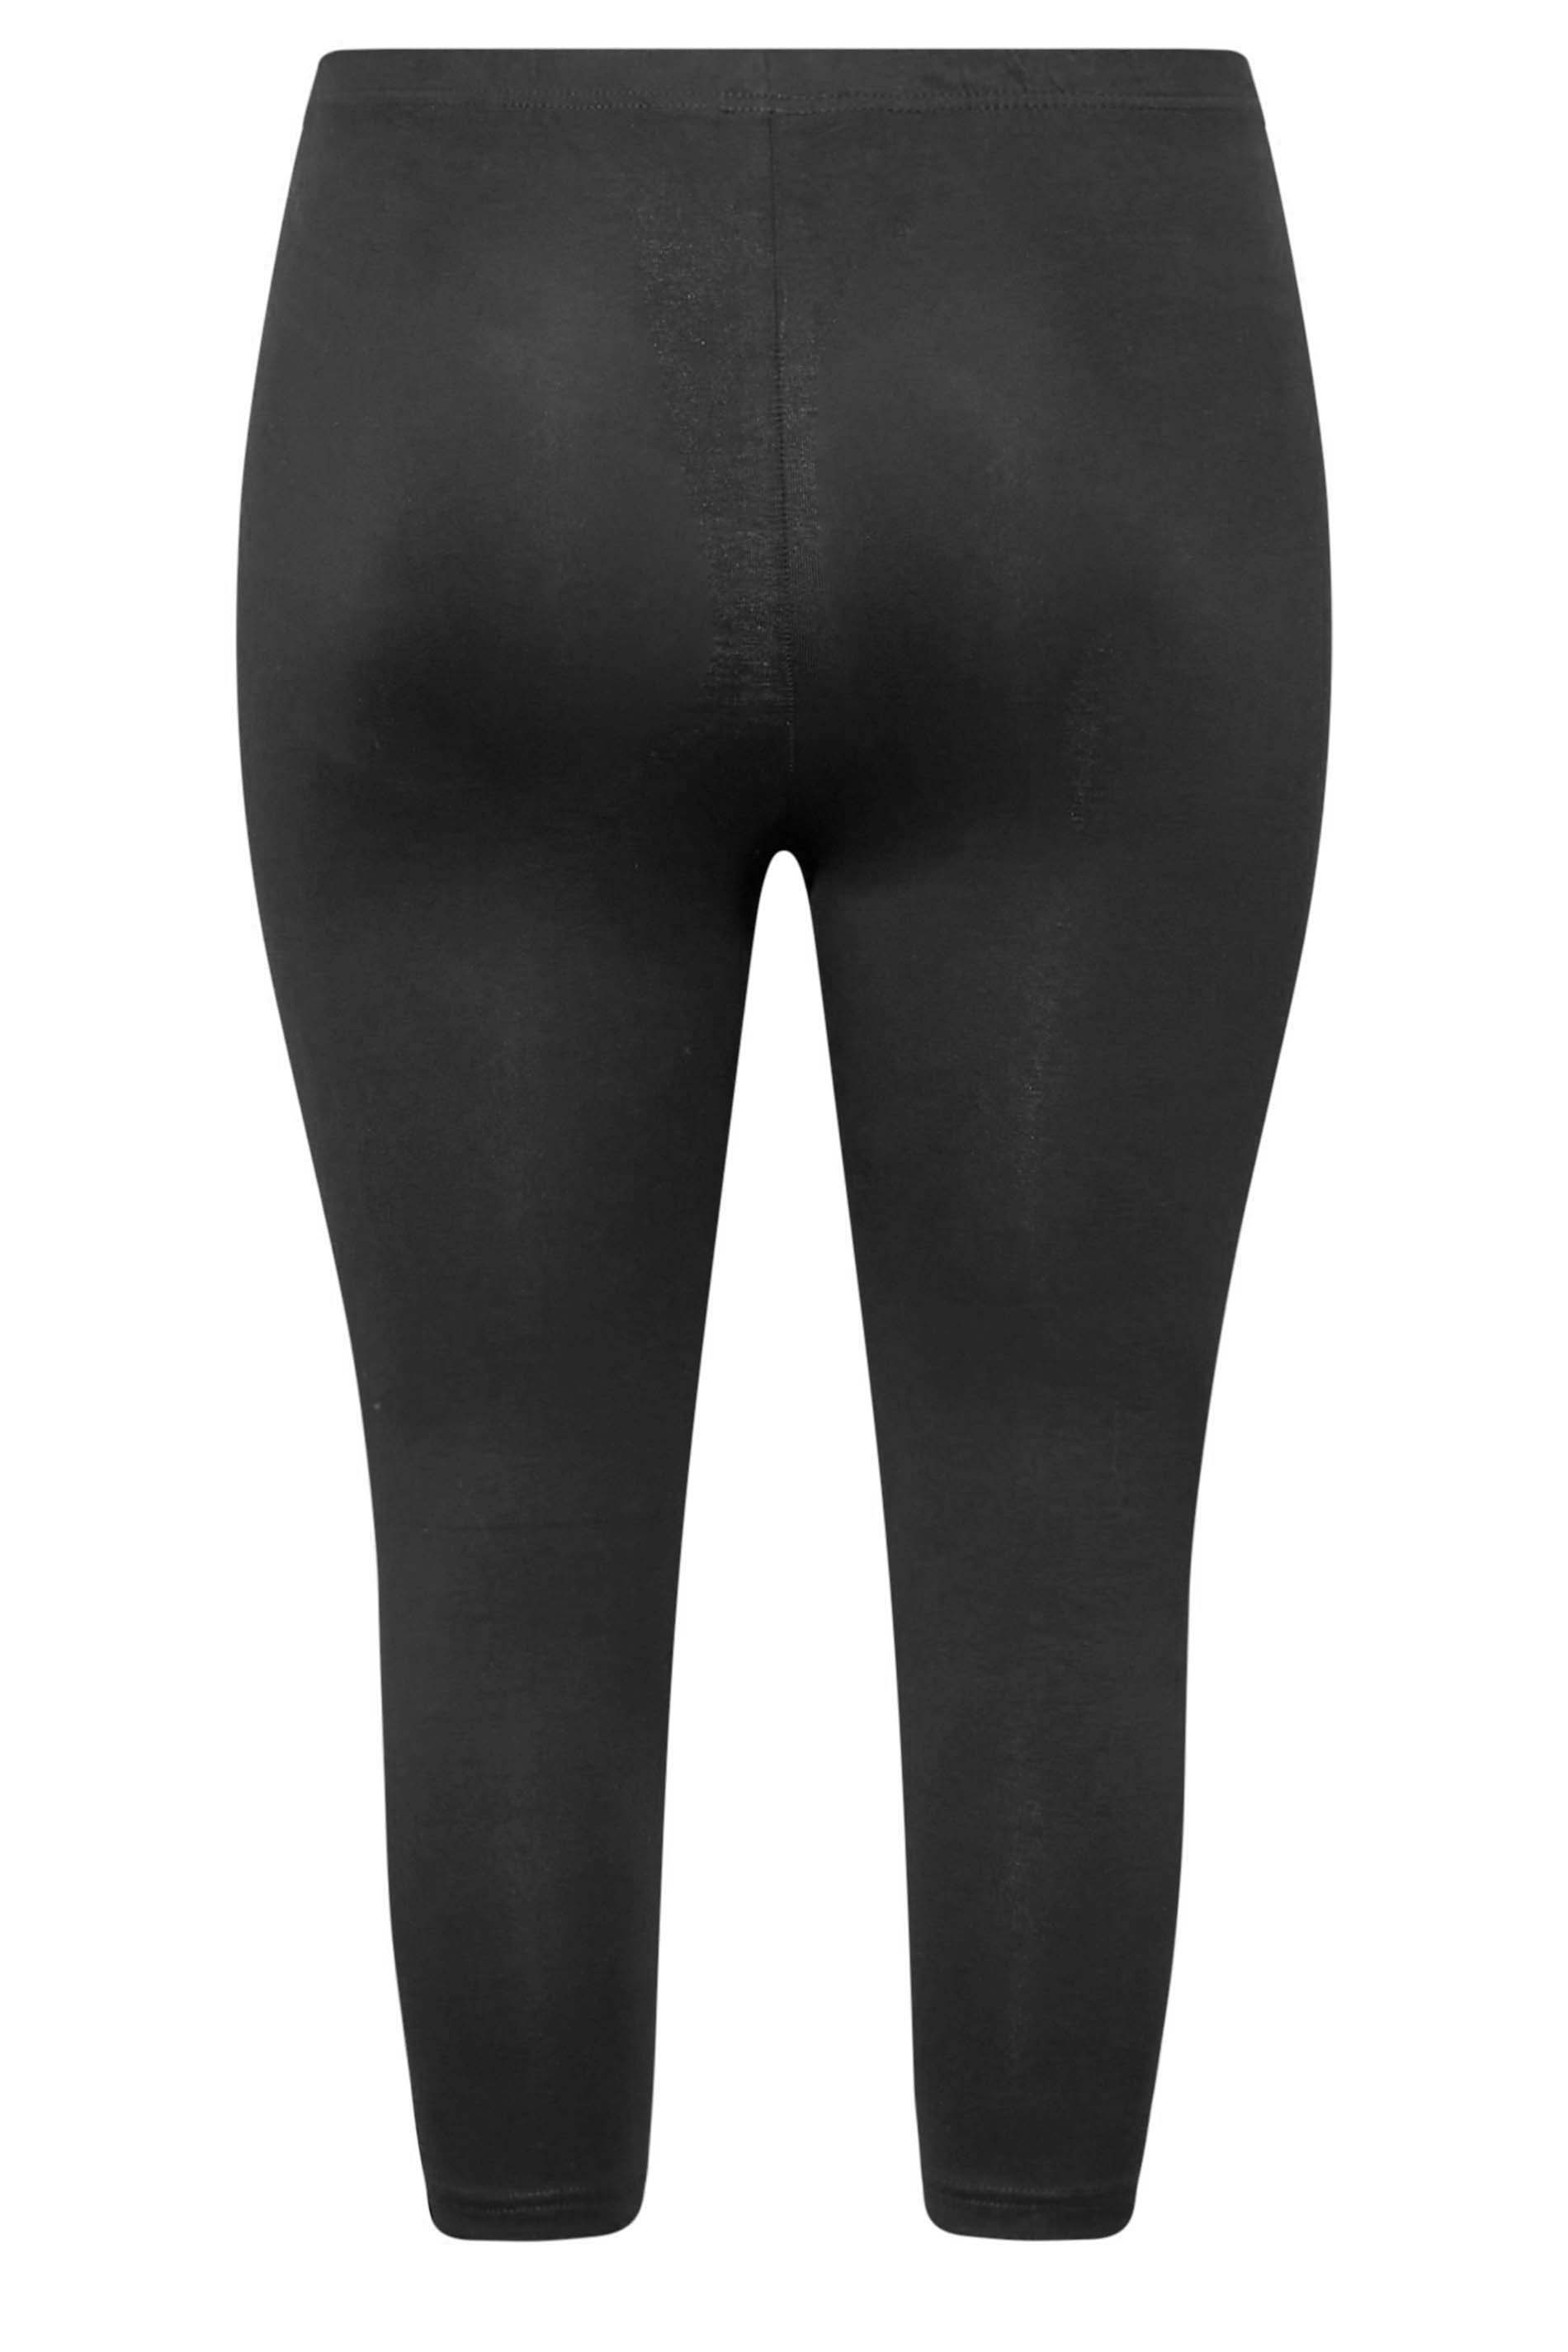 YOURS Curve Plus Size Black Cropped Leggings